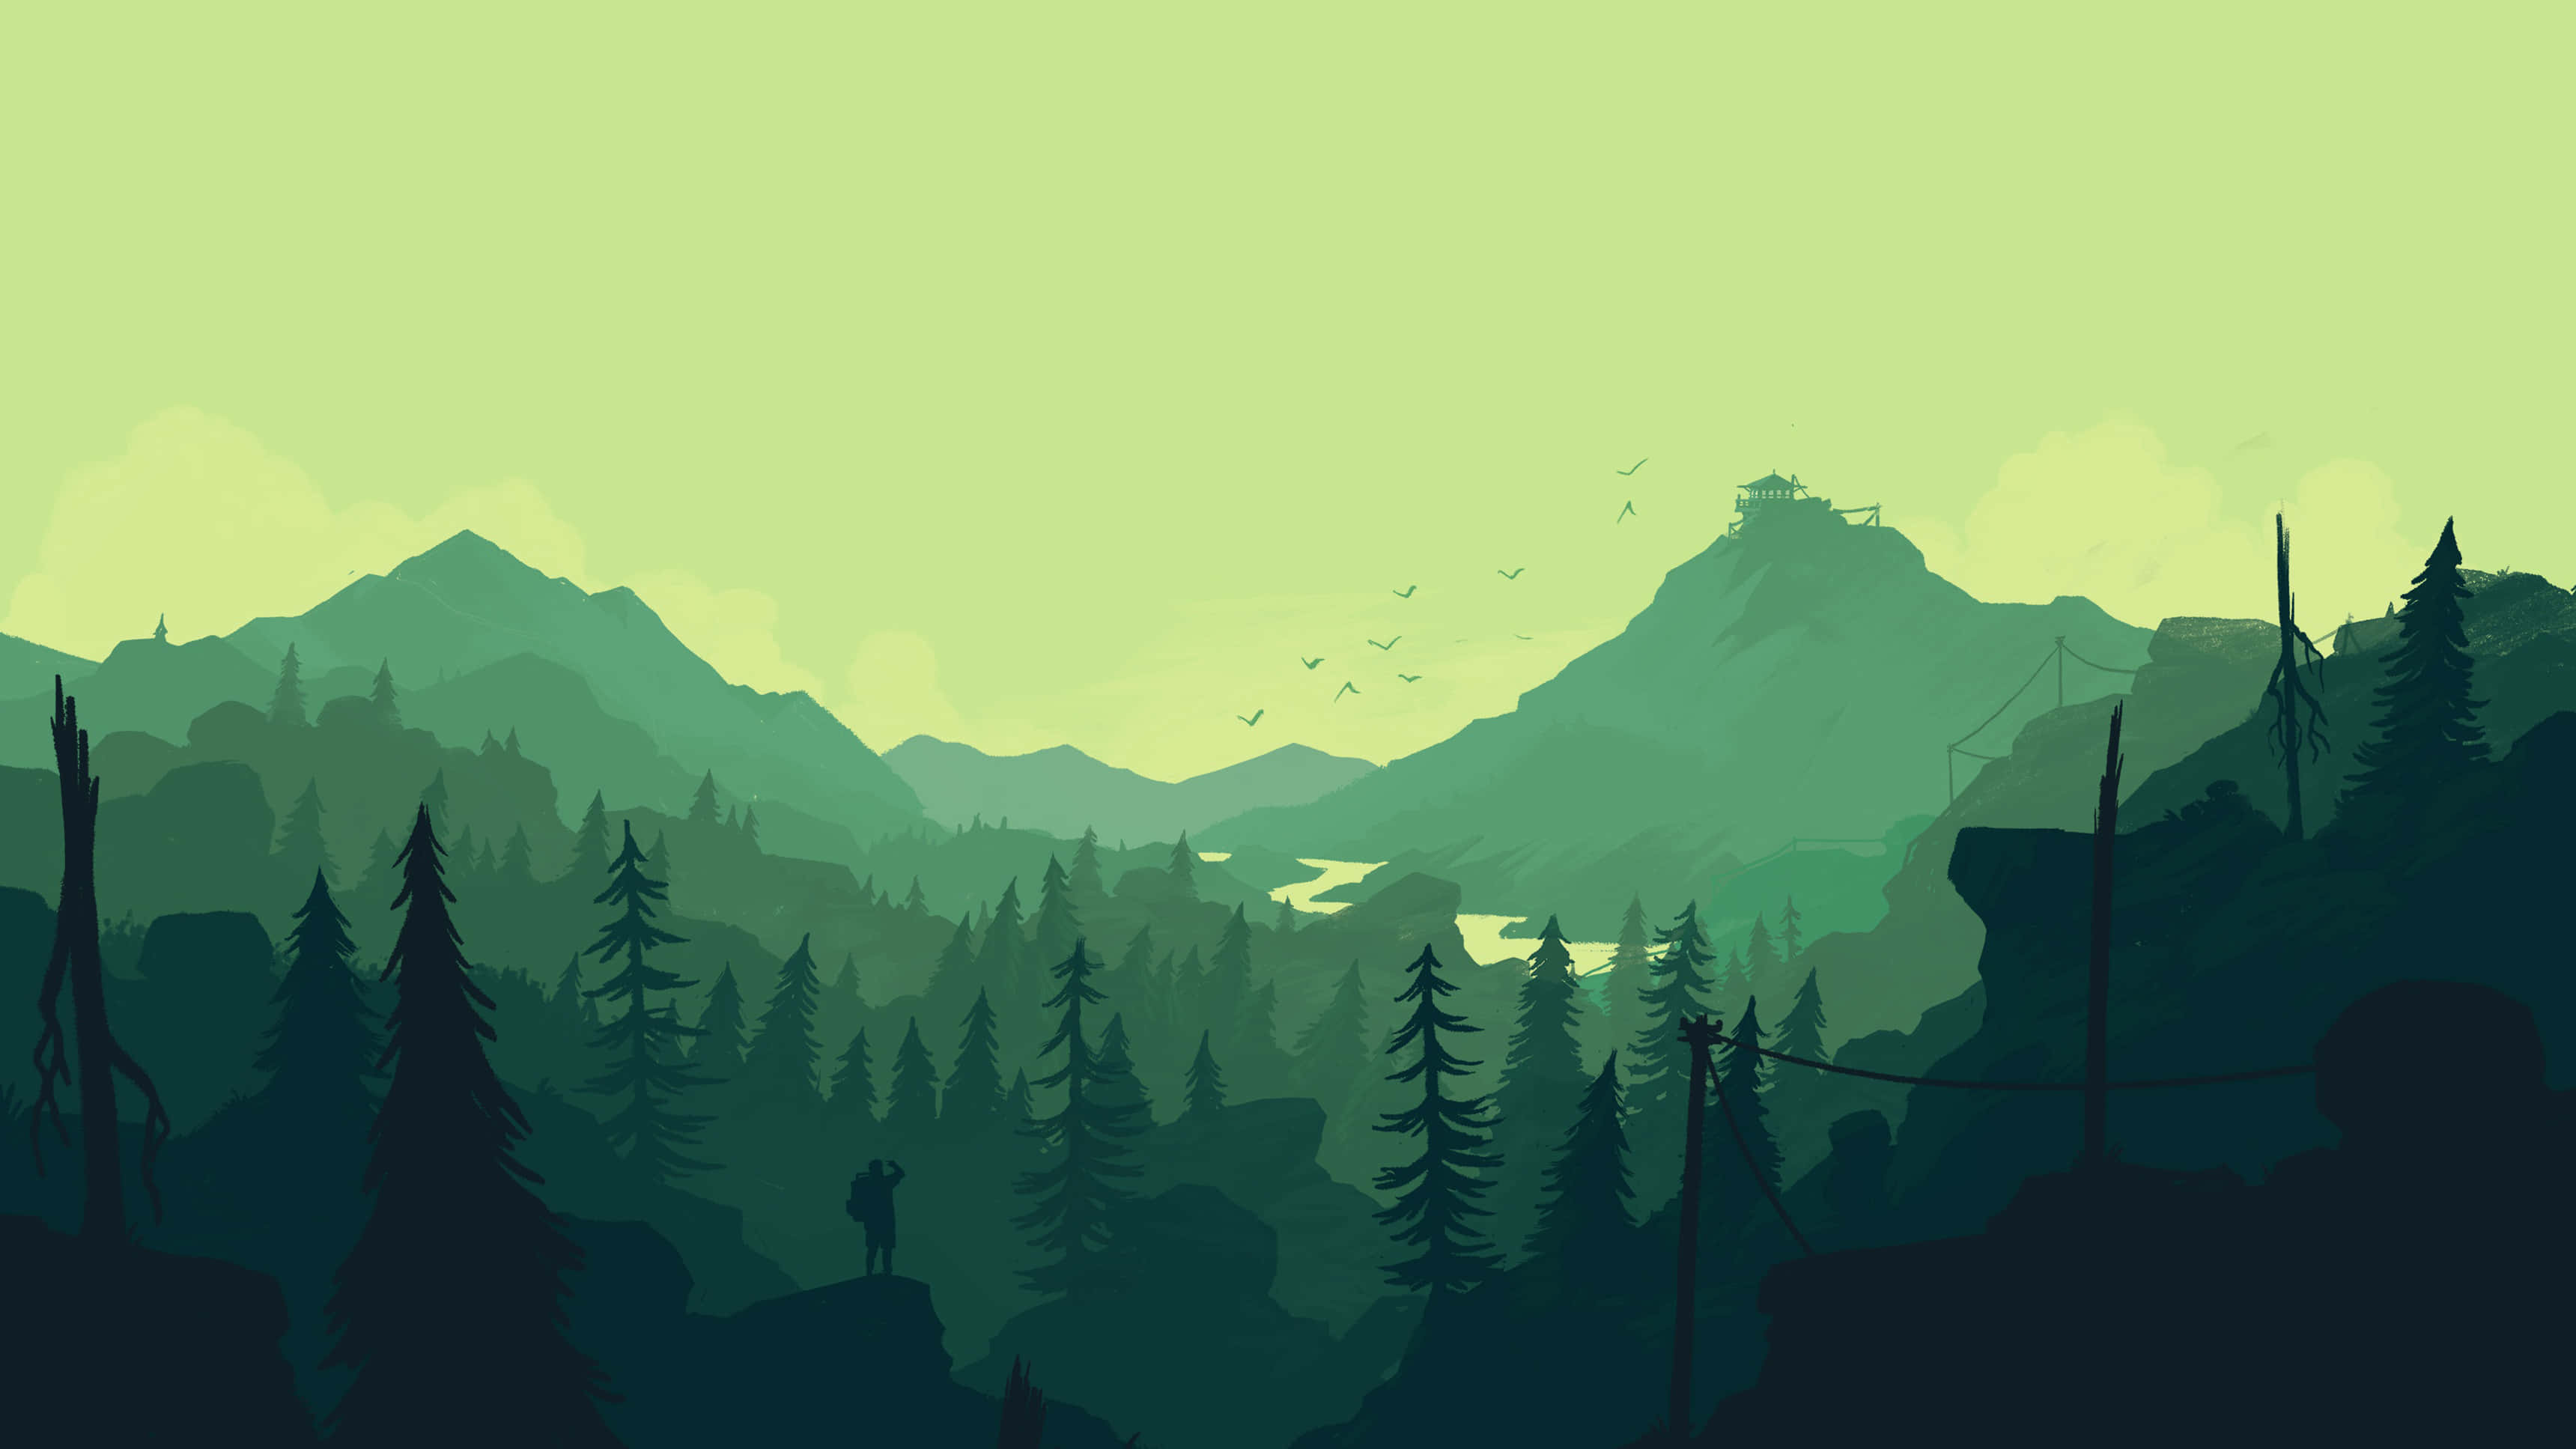 "Discover the beauty of nature in Firewatch."